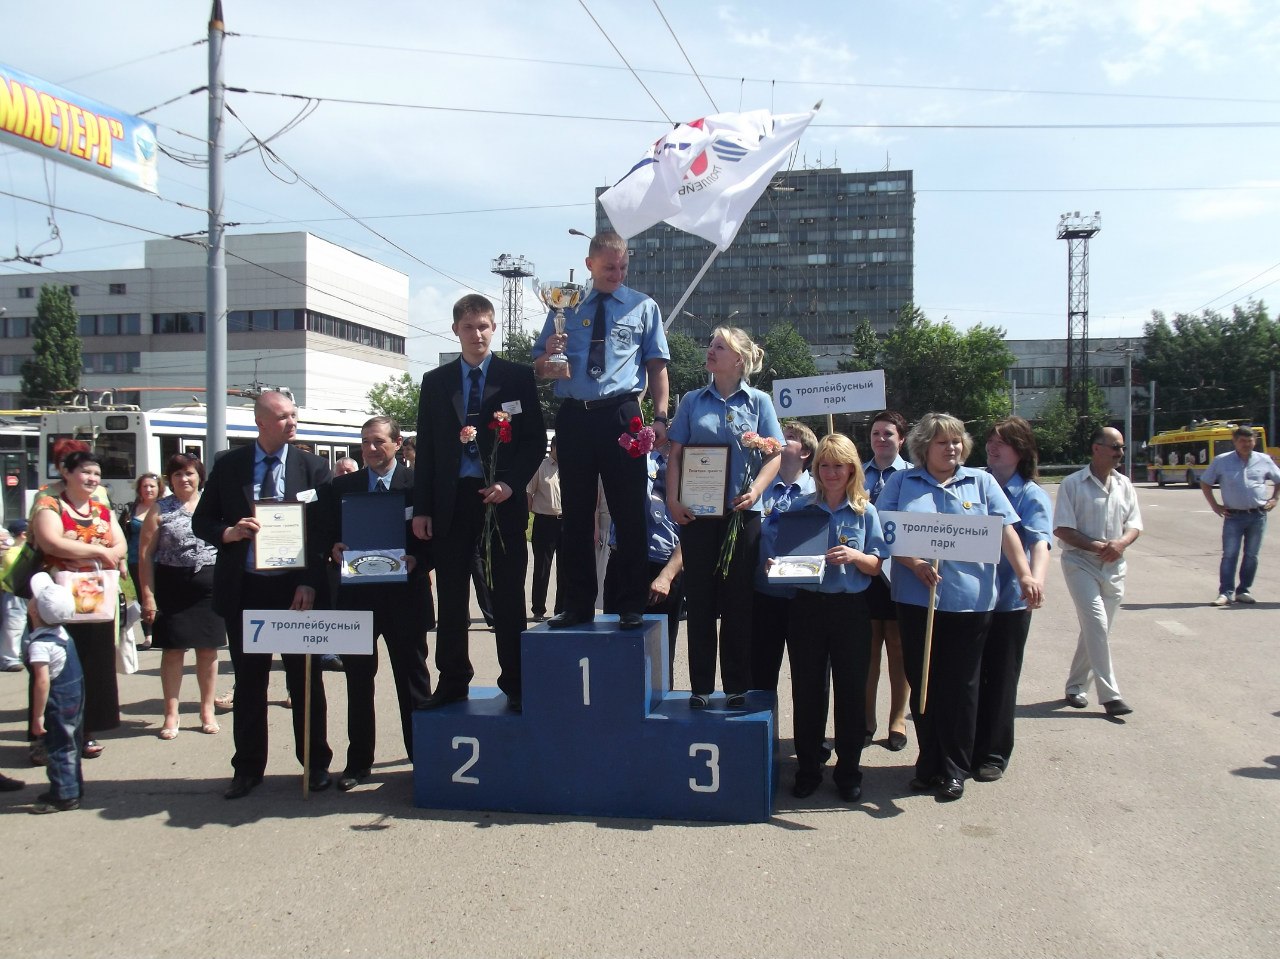 Moscow — 34th Championship of Trolleybus Drivers